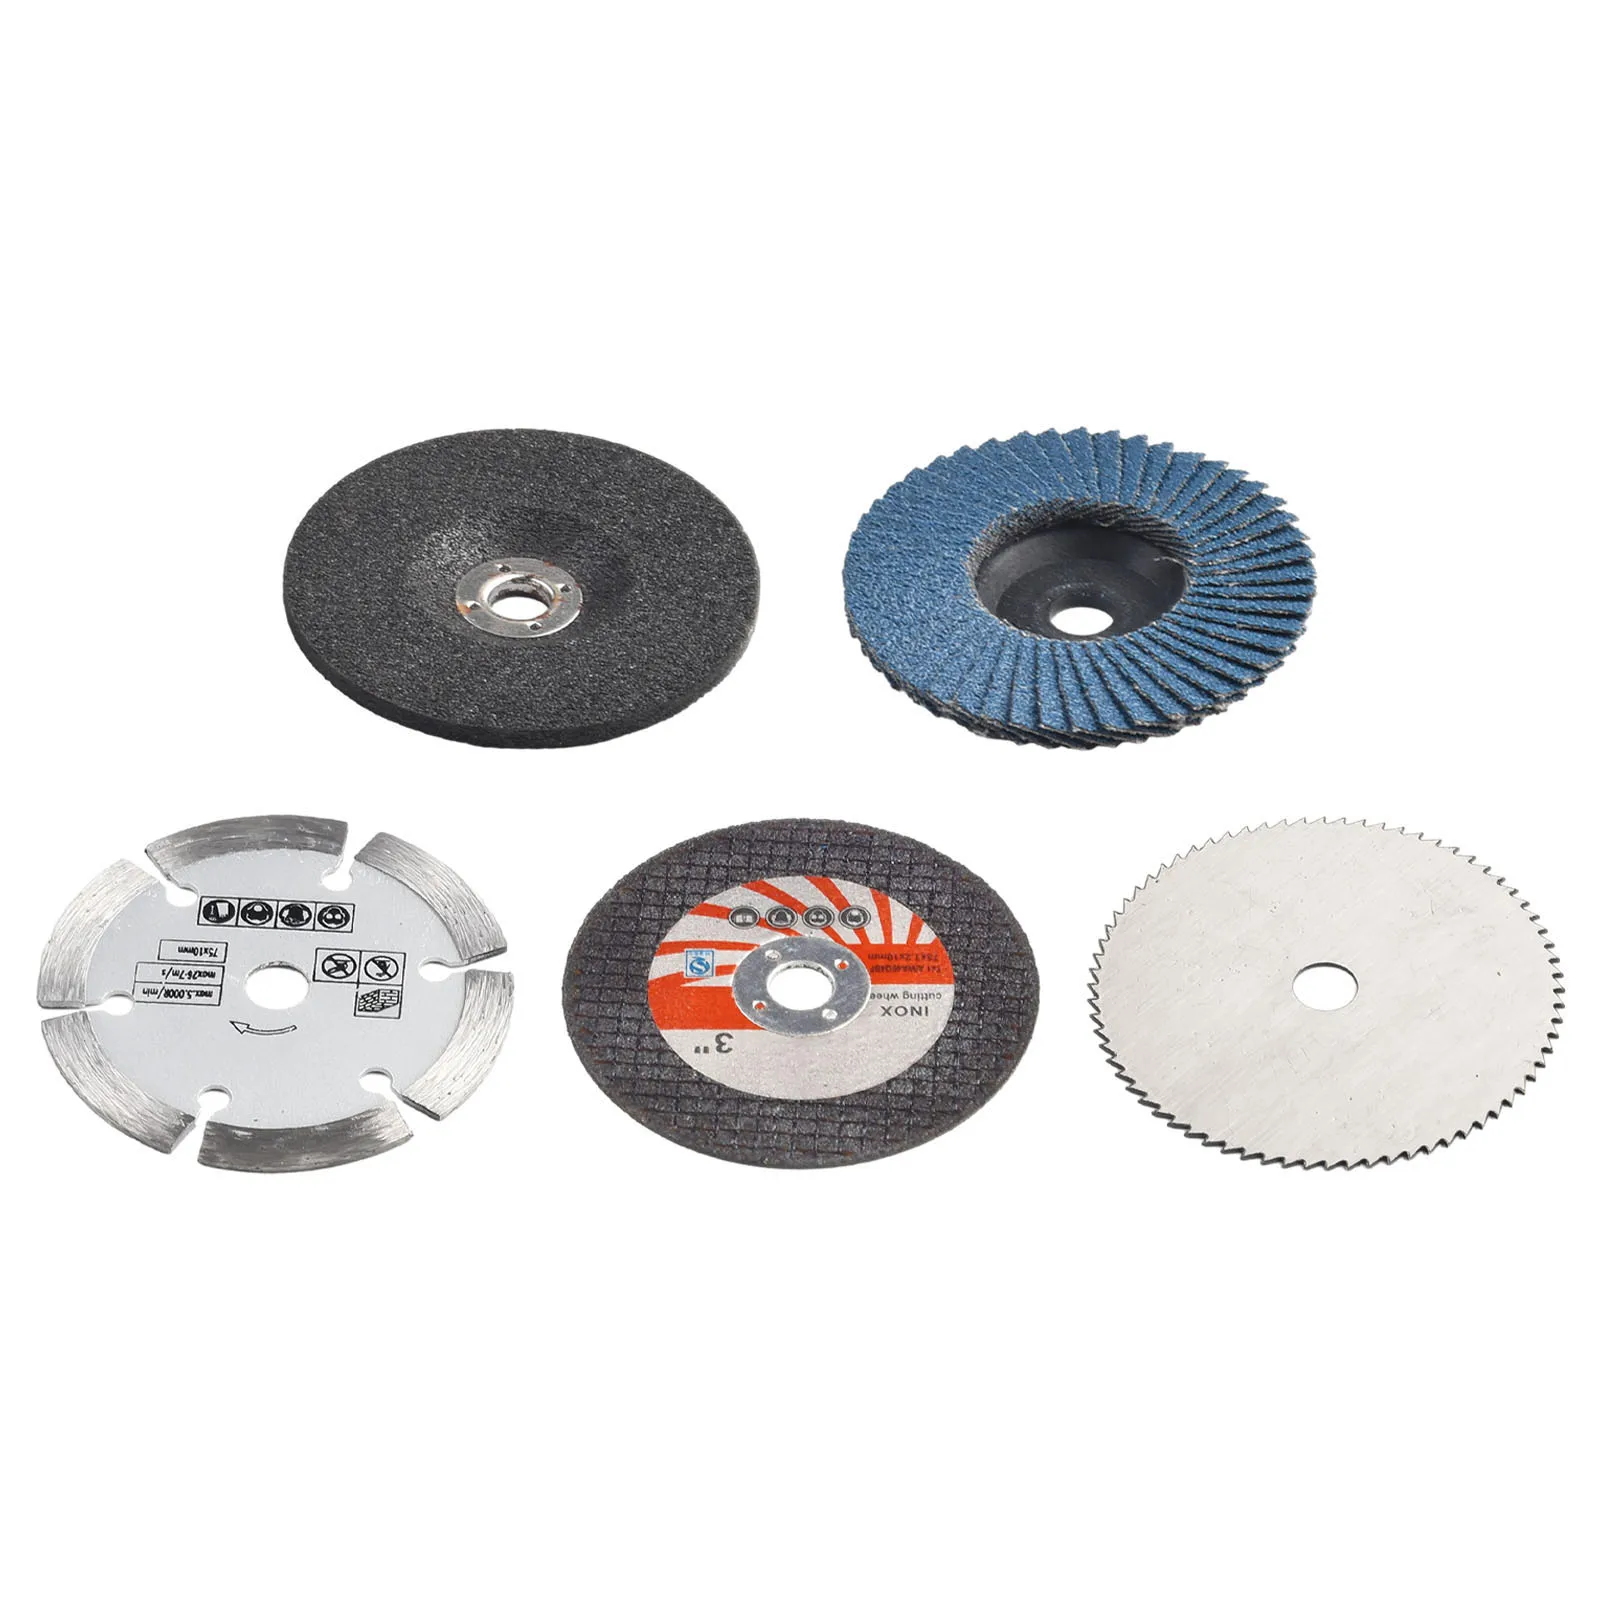 

1set Polishing Disc 75mm For Angle Grinder Circular Saw Blade Grinding Wheel Cutting Discs Angle Grinder Attachment